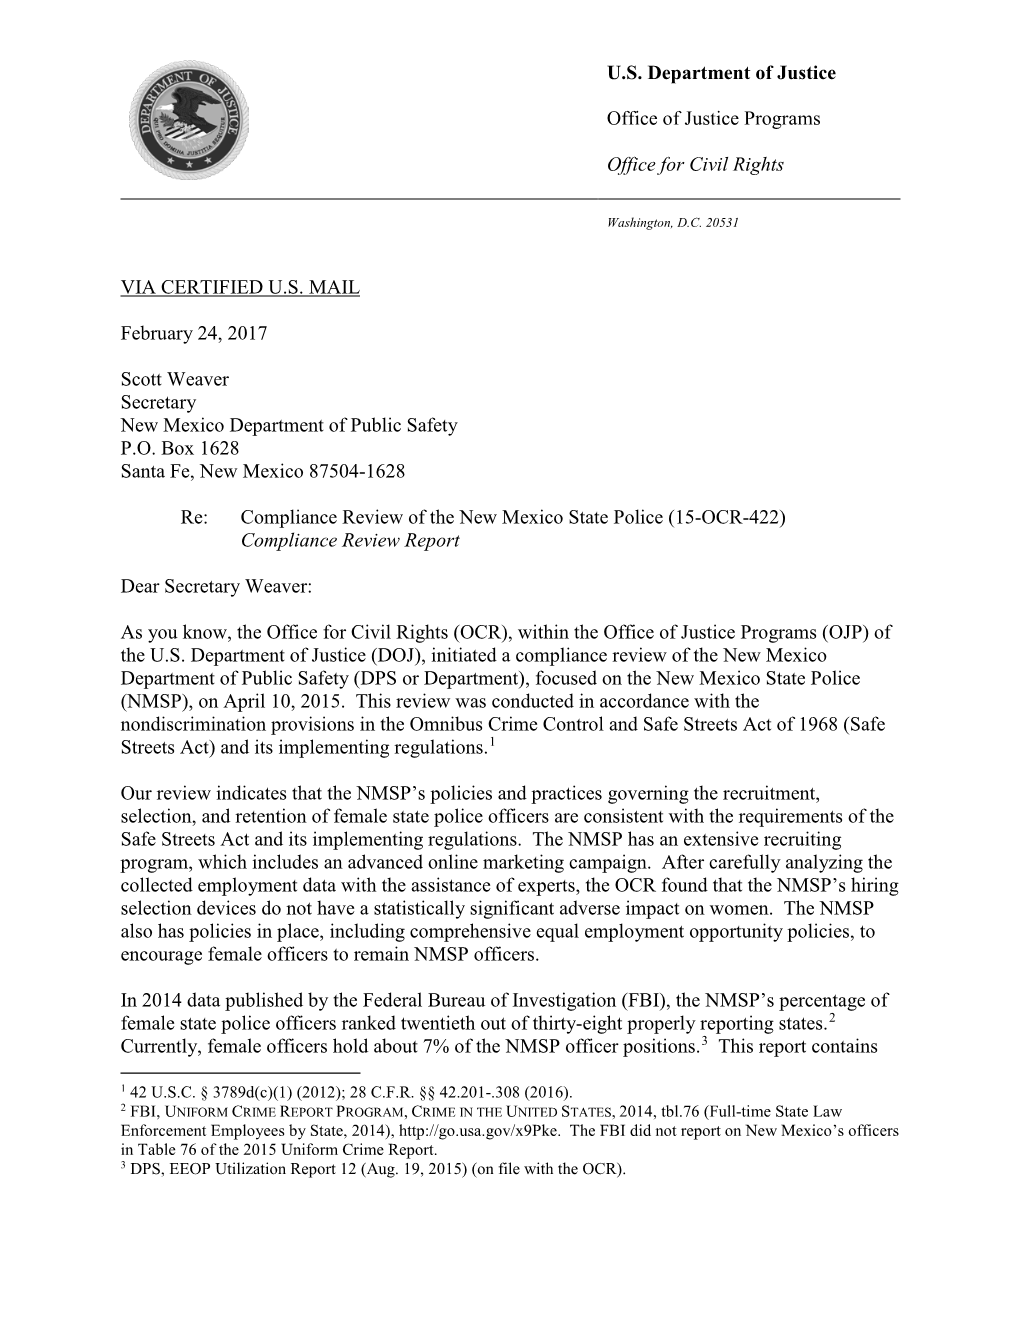 Compliance Review of the New Mexico State Police (15-OCR-422) Compliance Review Report